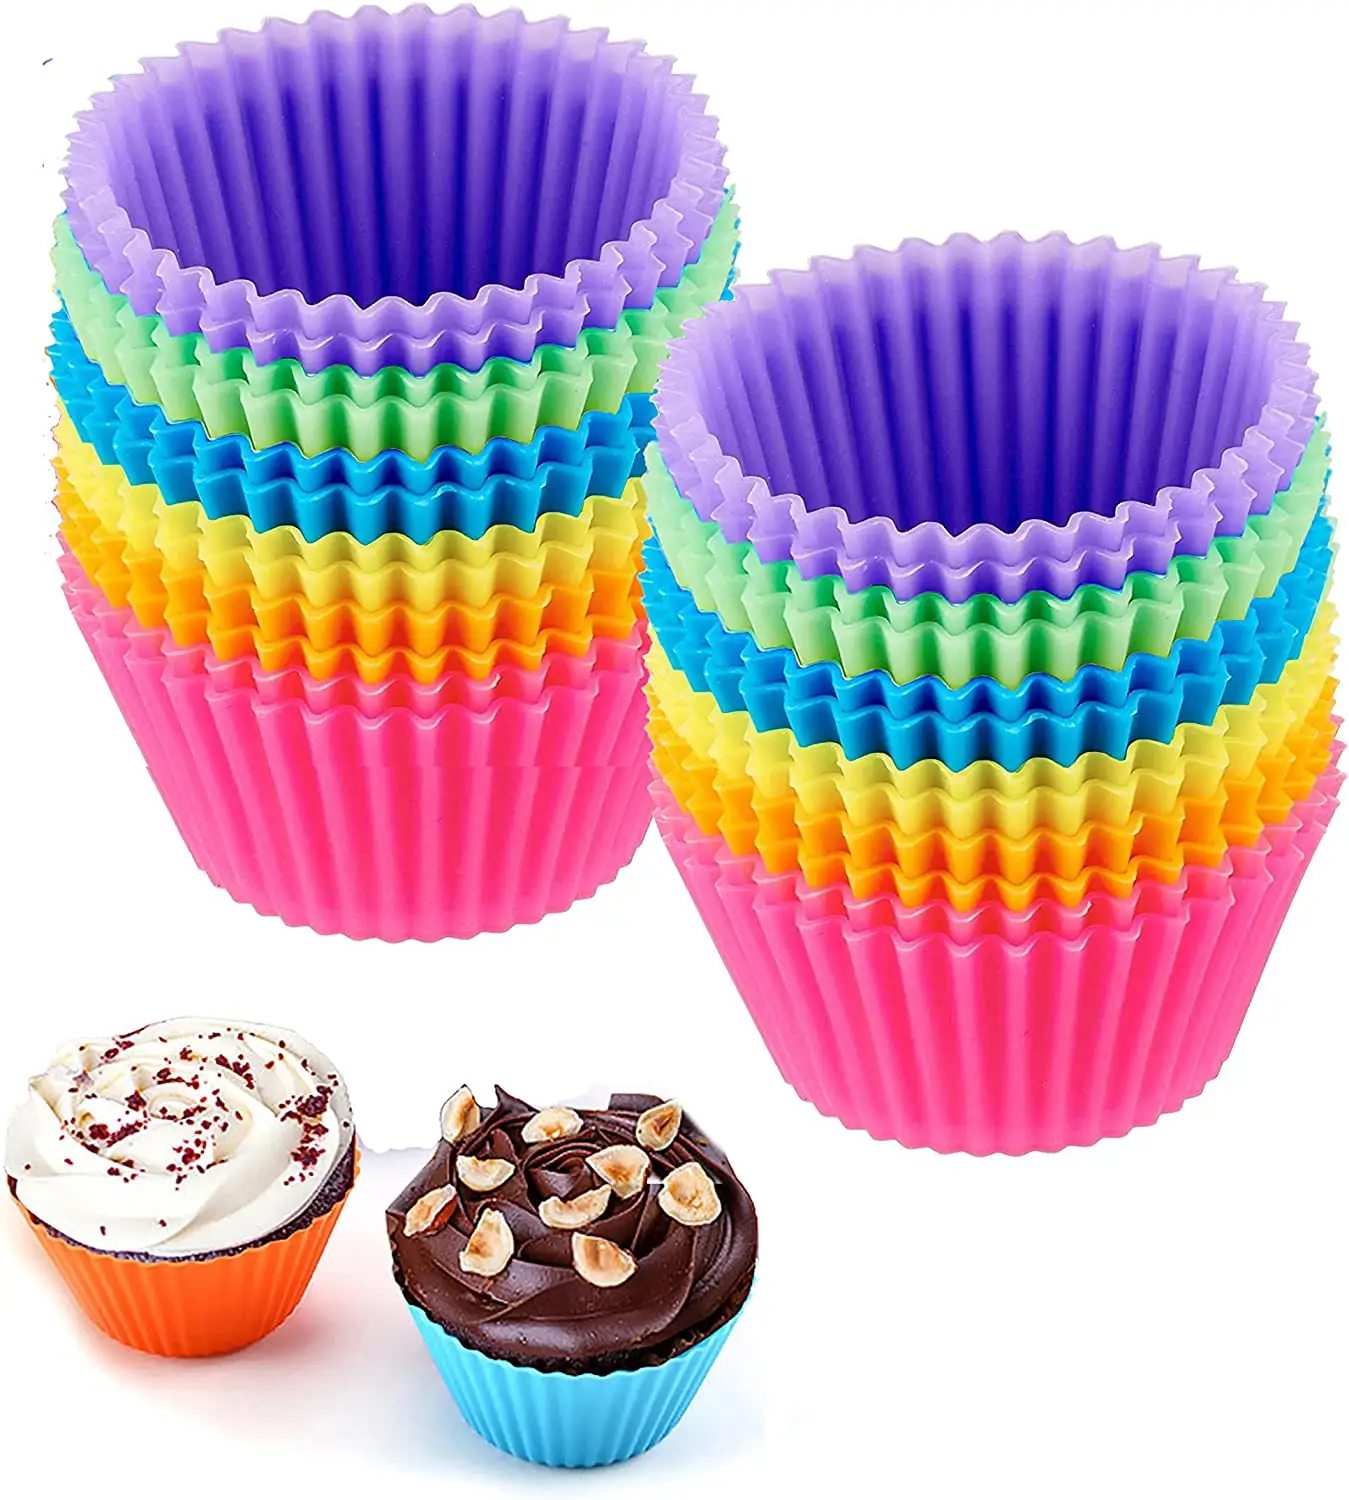 Reusable Silicone Cupcake Baking Cups Nonstick Muffin Cupcake Liners for Party Halloween Christmas